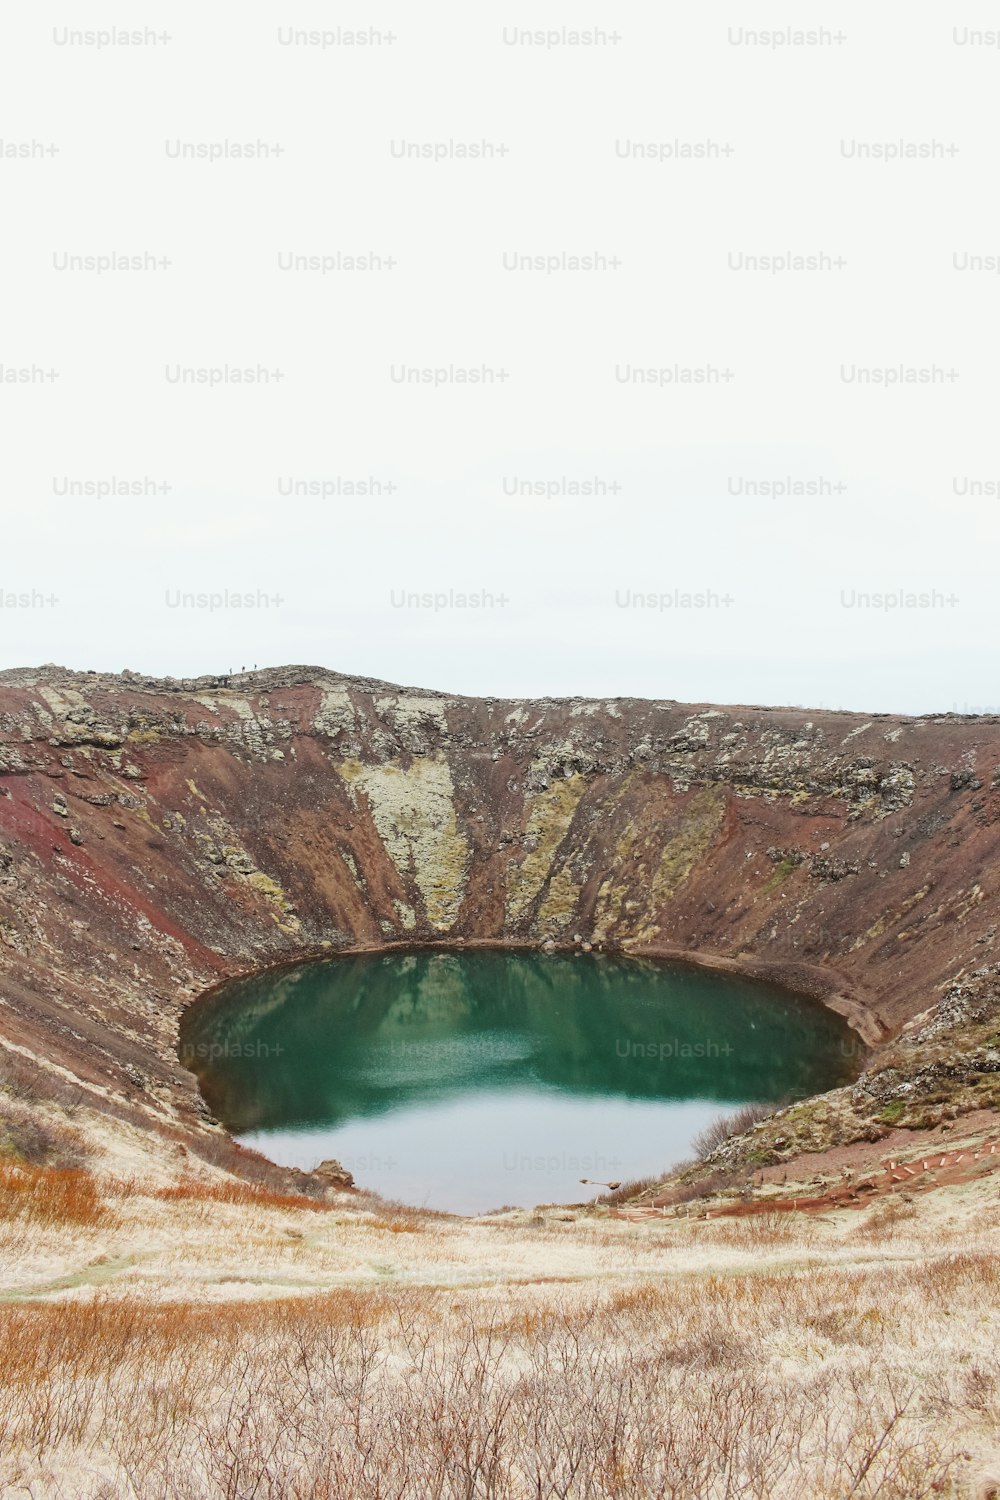 a large crater in the middle of a field